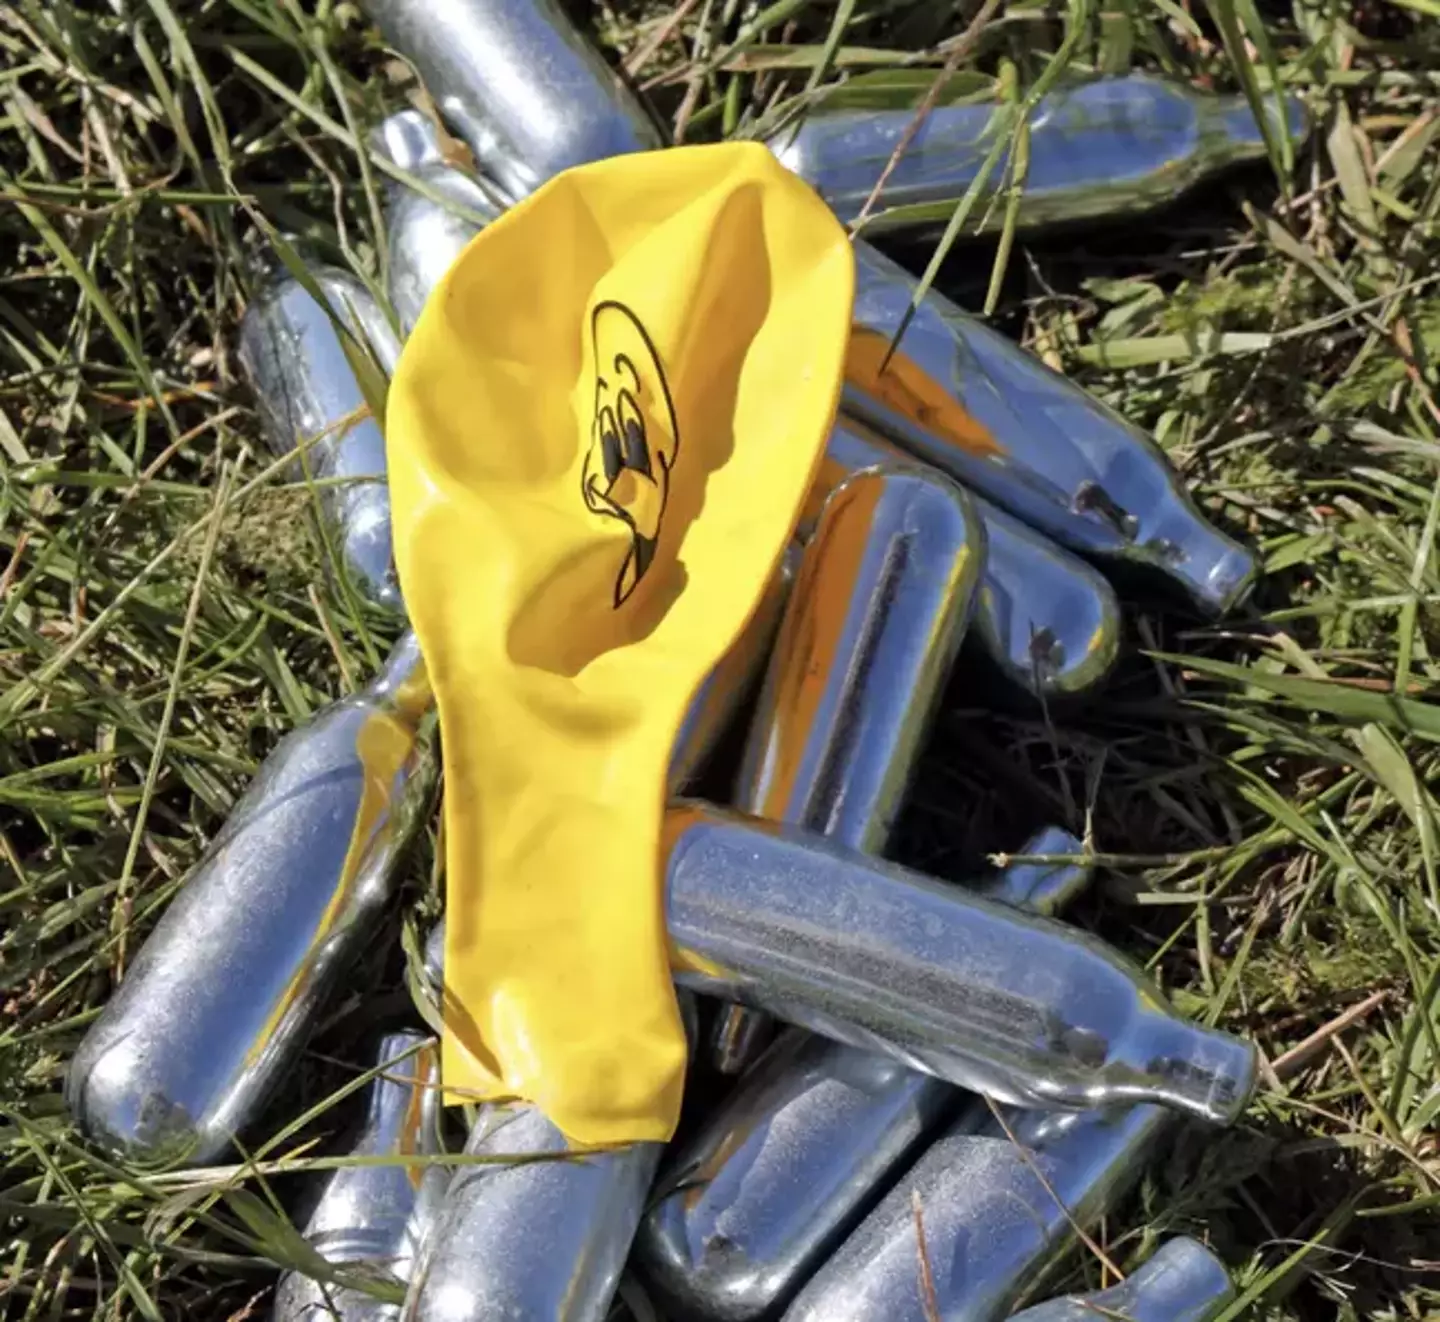 The government is going to crack down on people using laughing gas.